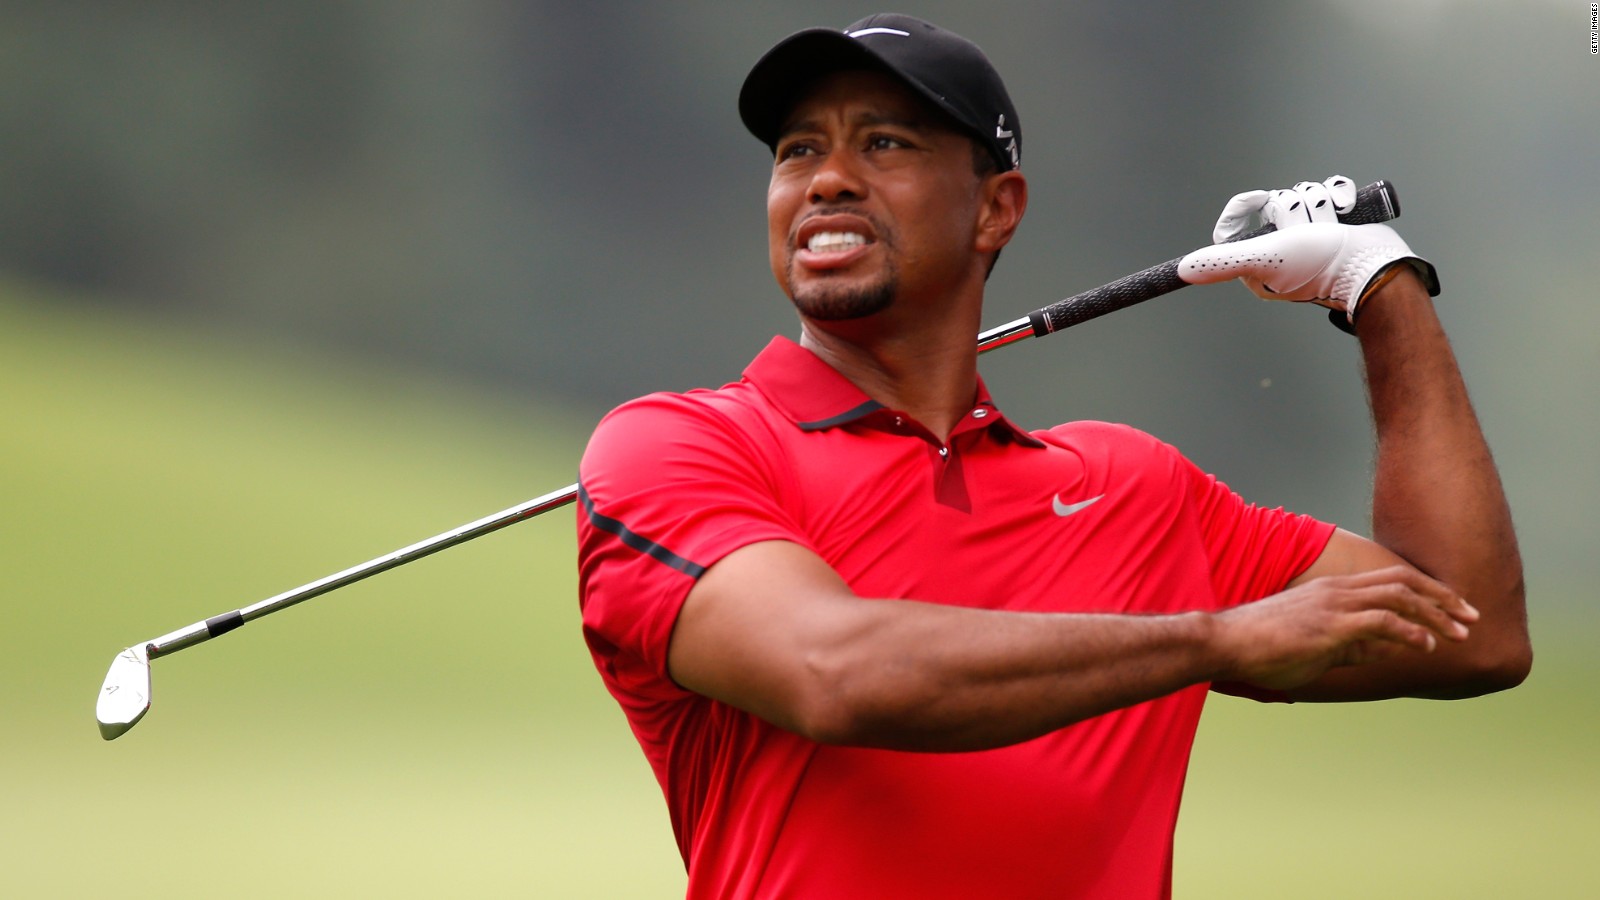 Golf: Tiger Woods out of tournament with back problems - CNN